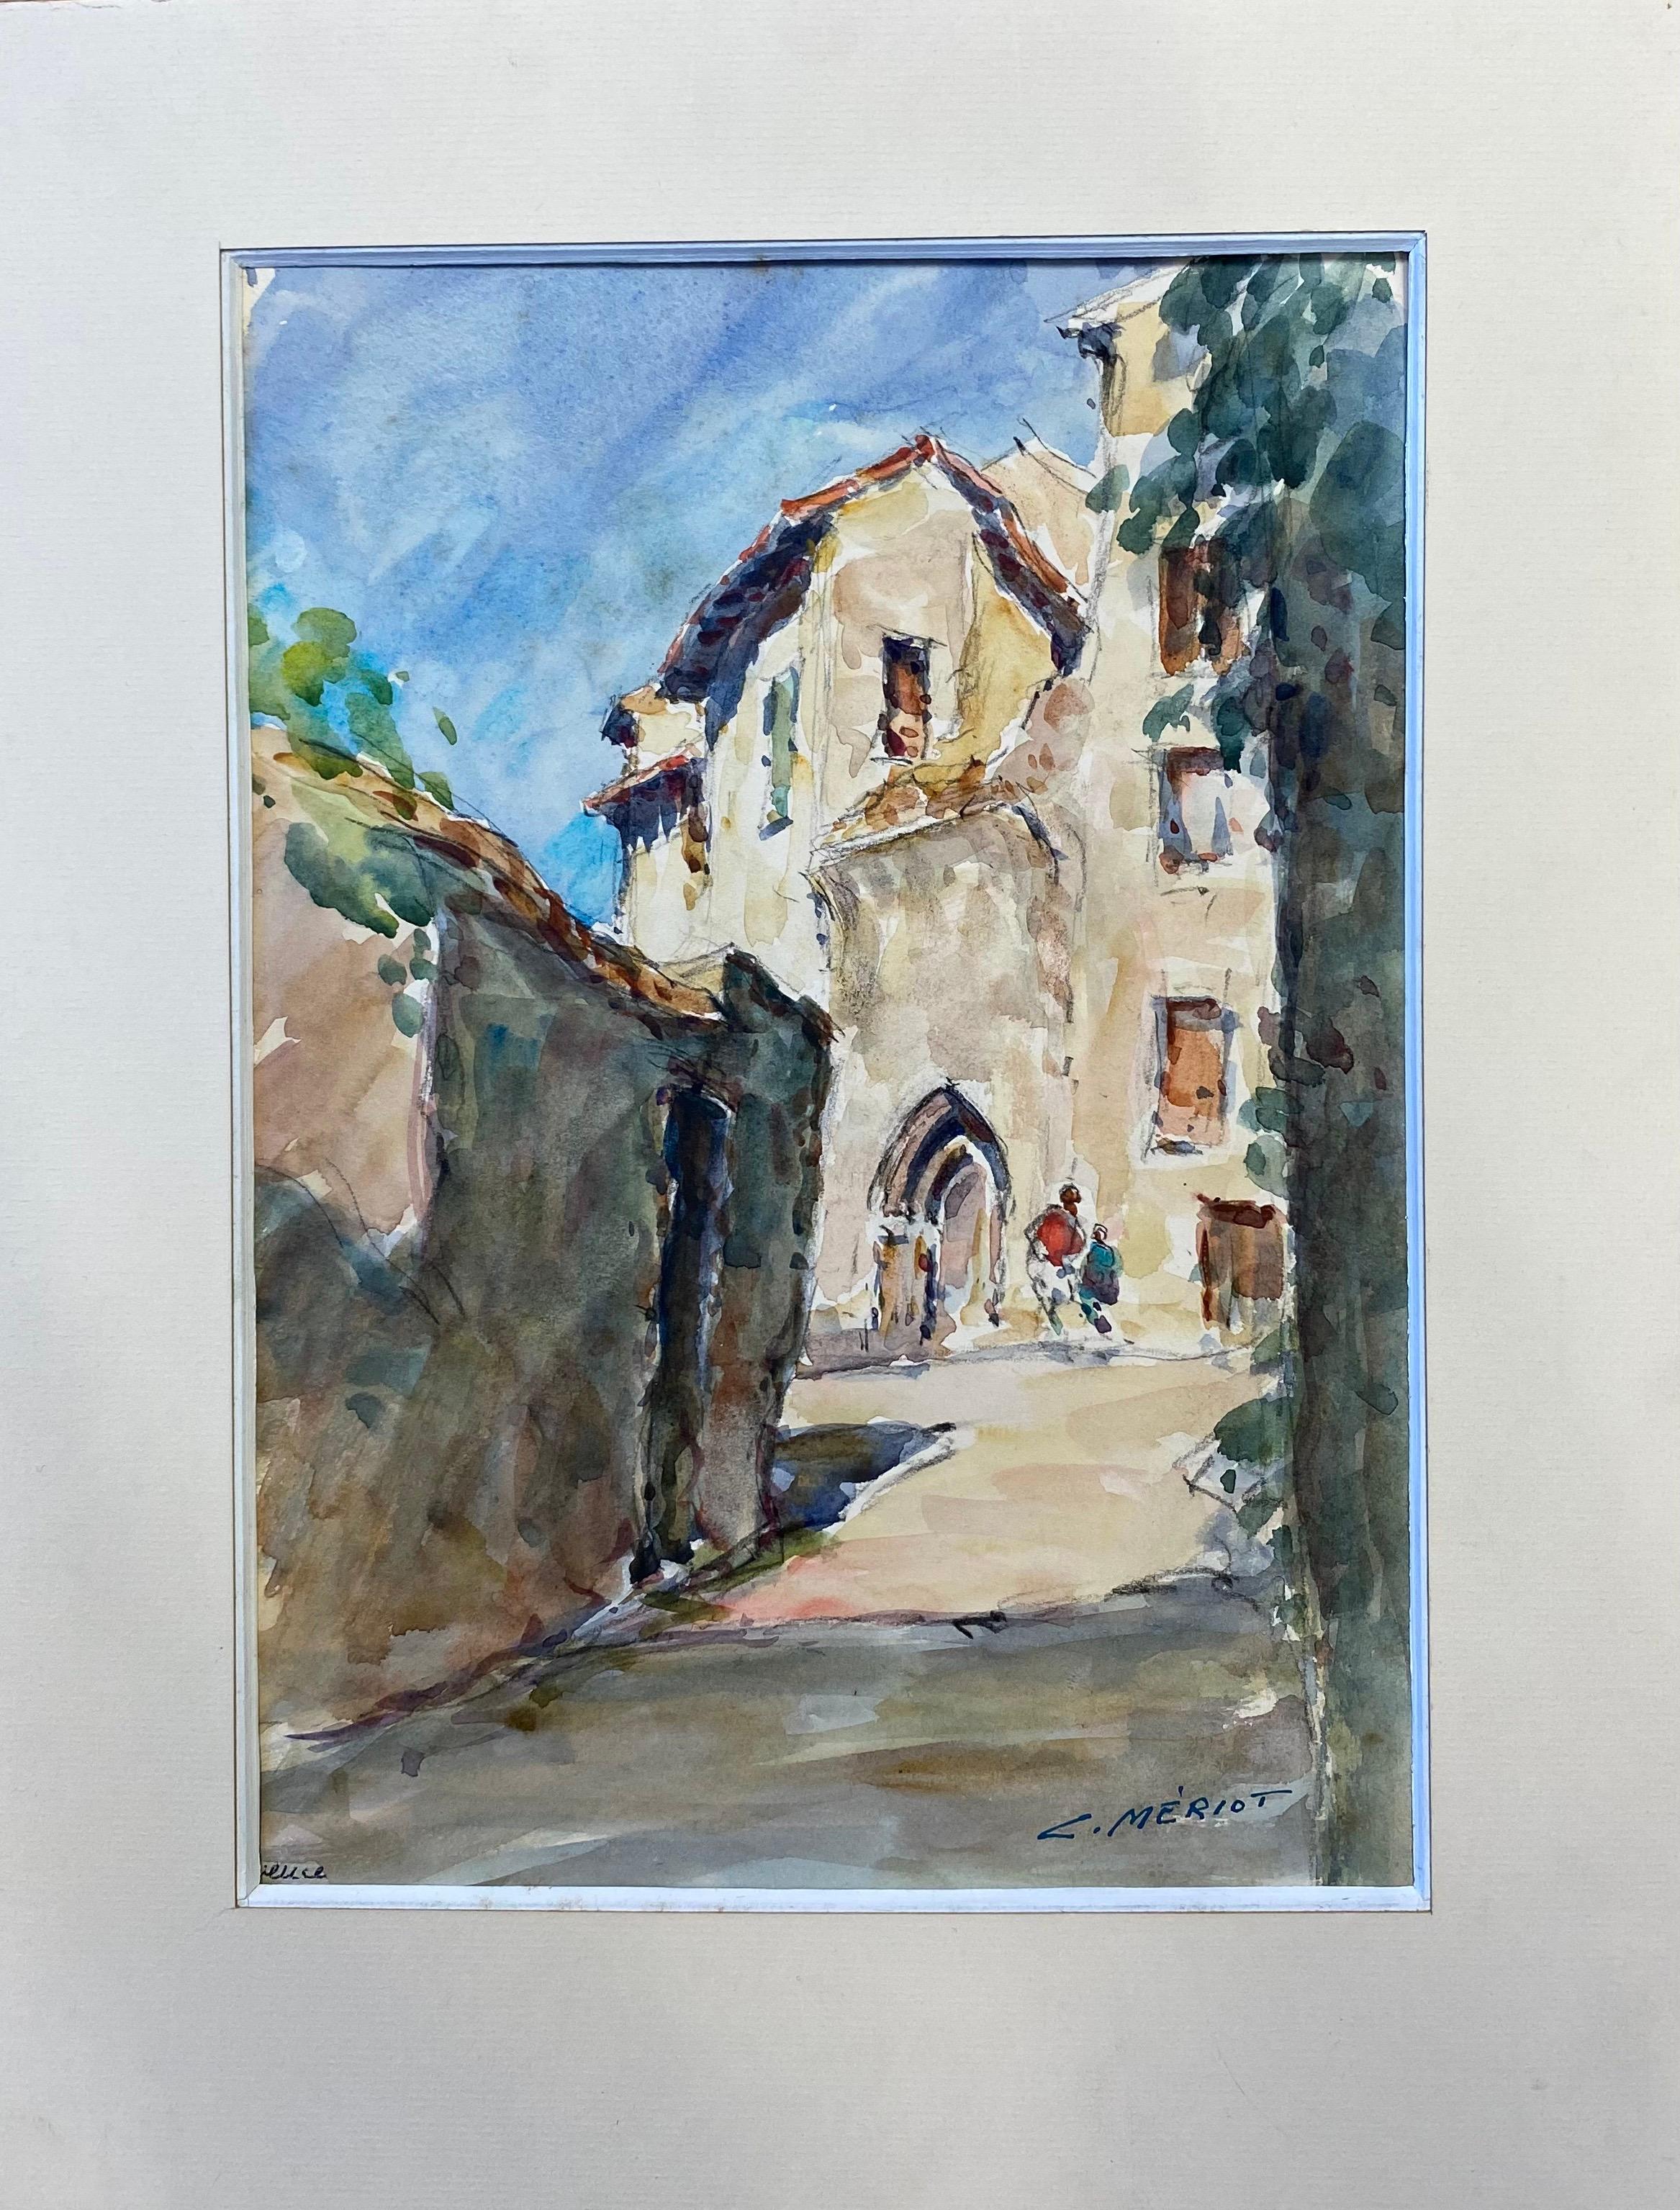 Figures Walking in old Provencal Village, vintage French Impressionist painting - Painting by Camille Meriot